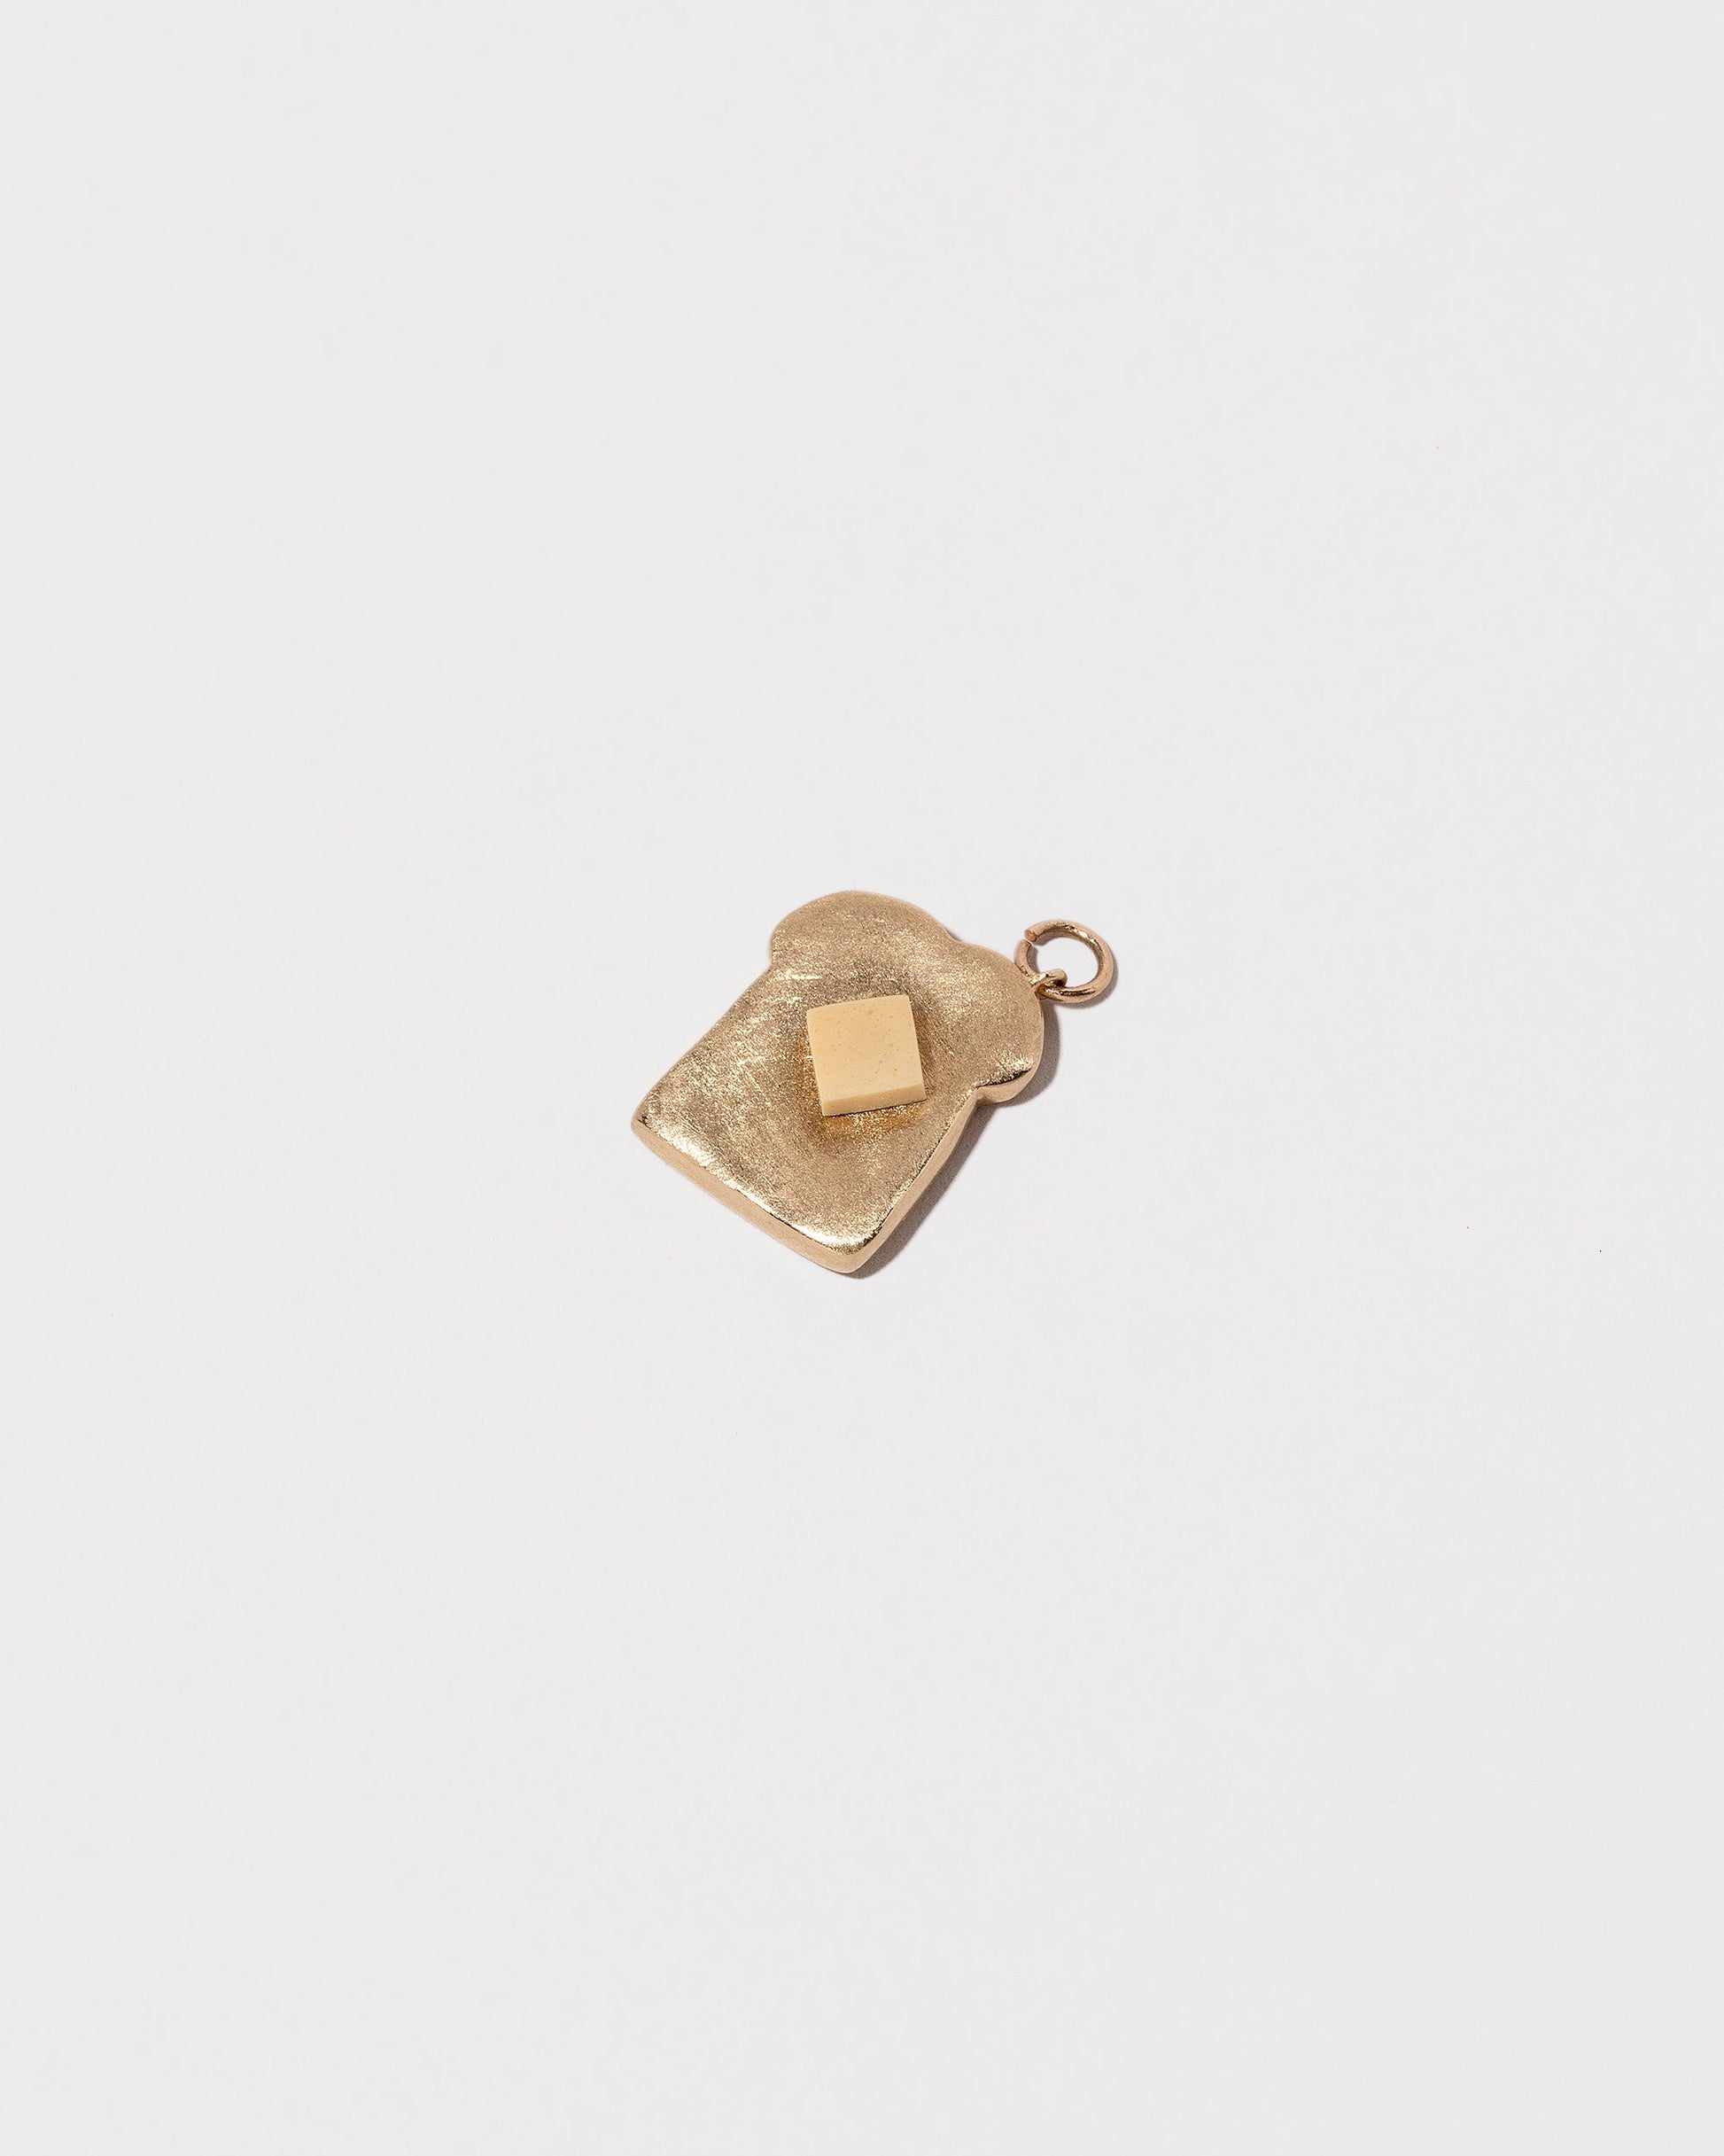  Toast Charm - with Butter on light color background.